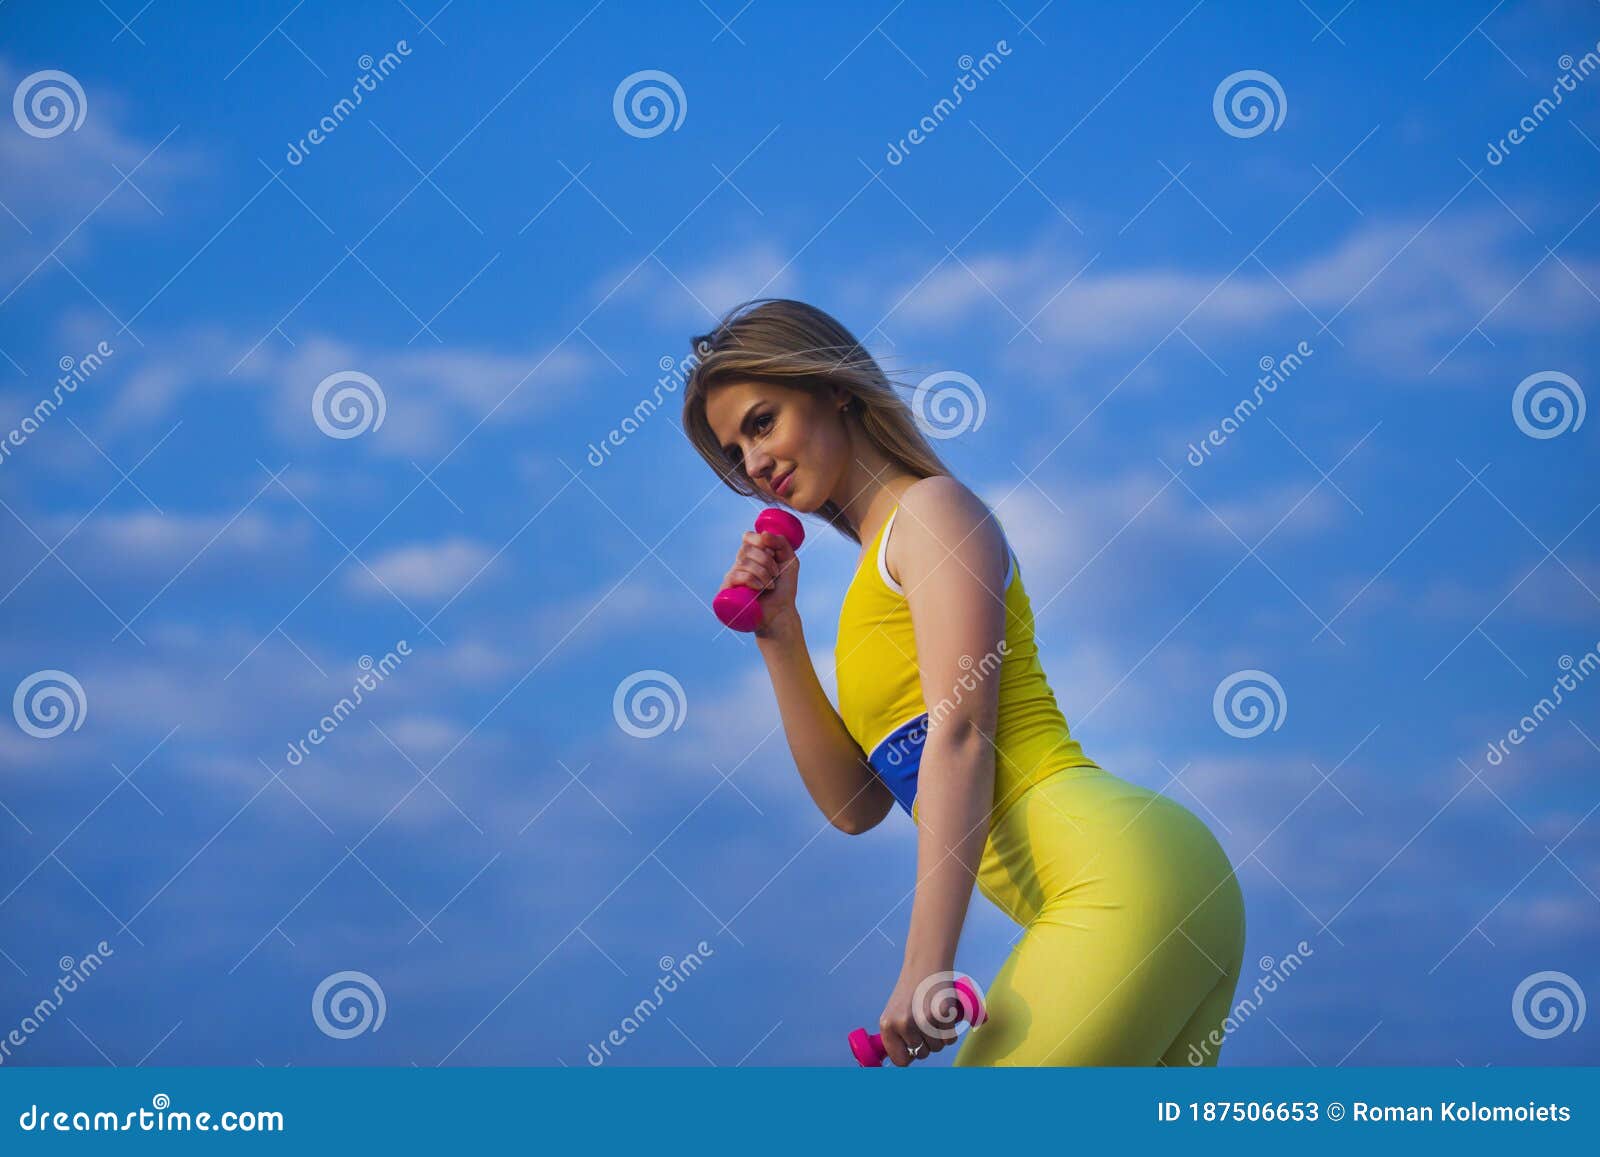 Beauty Perfect Body Presents Slim Fitness Girl Stock Image Image Of Performance Perfect